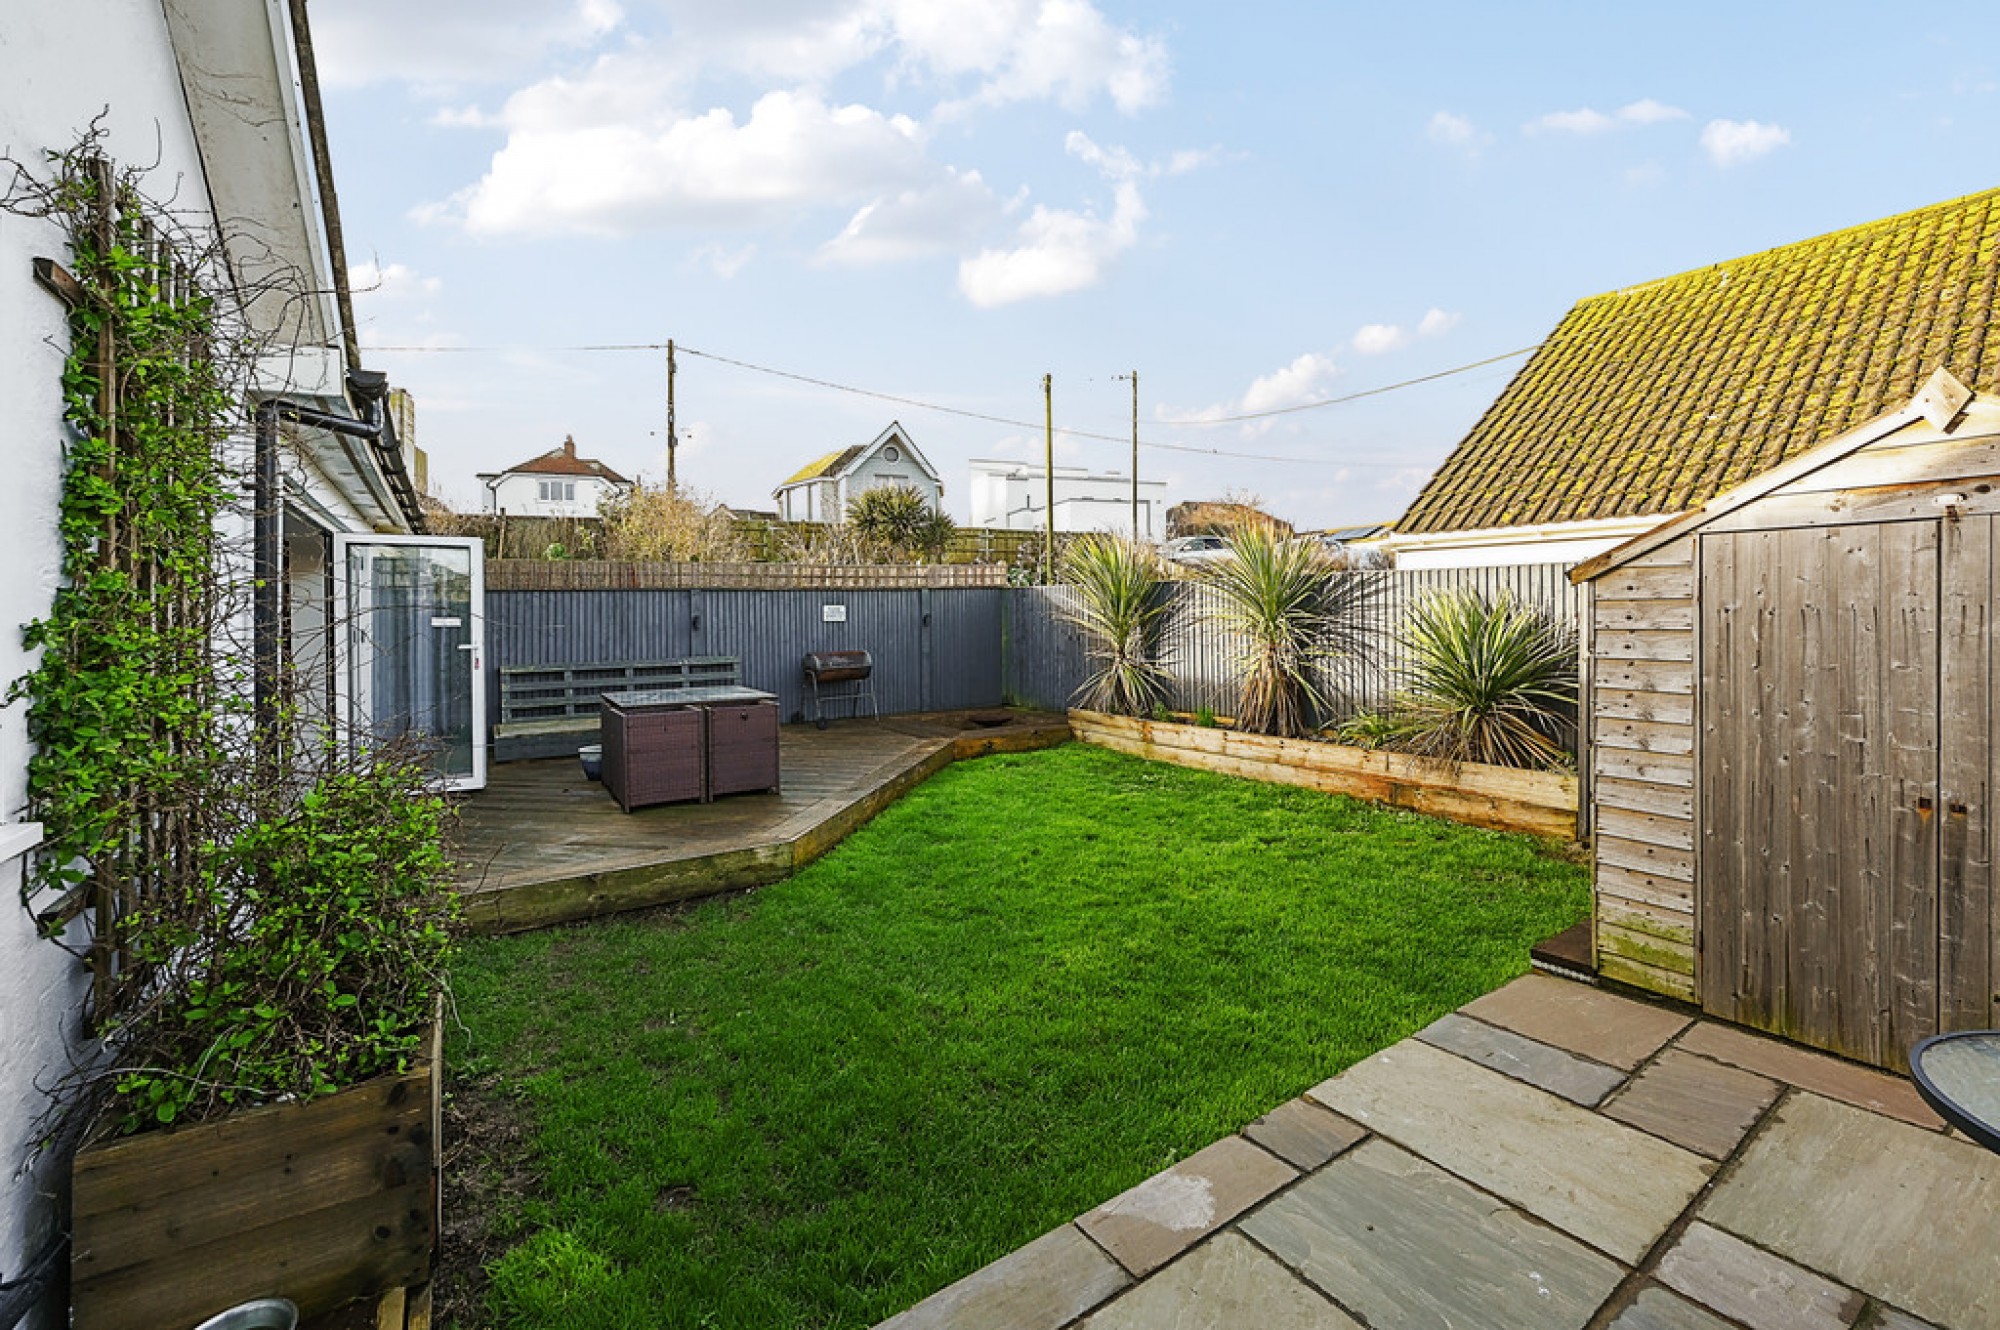 Images for Lydd Road, Camber, East Sussex TN31 7RS